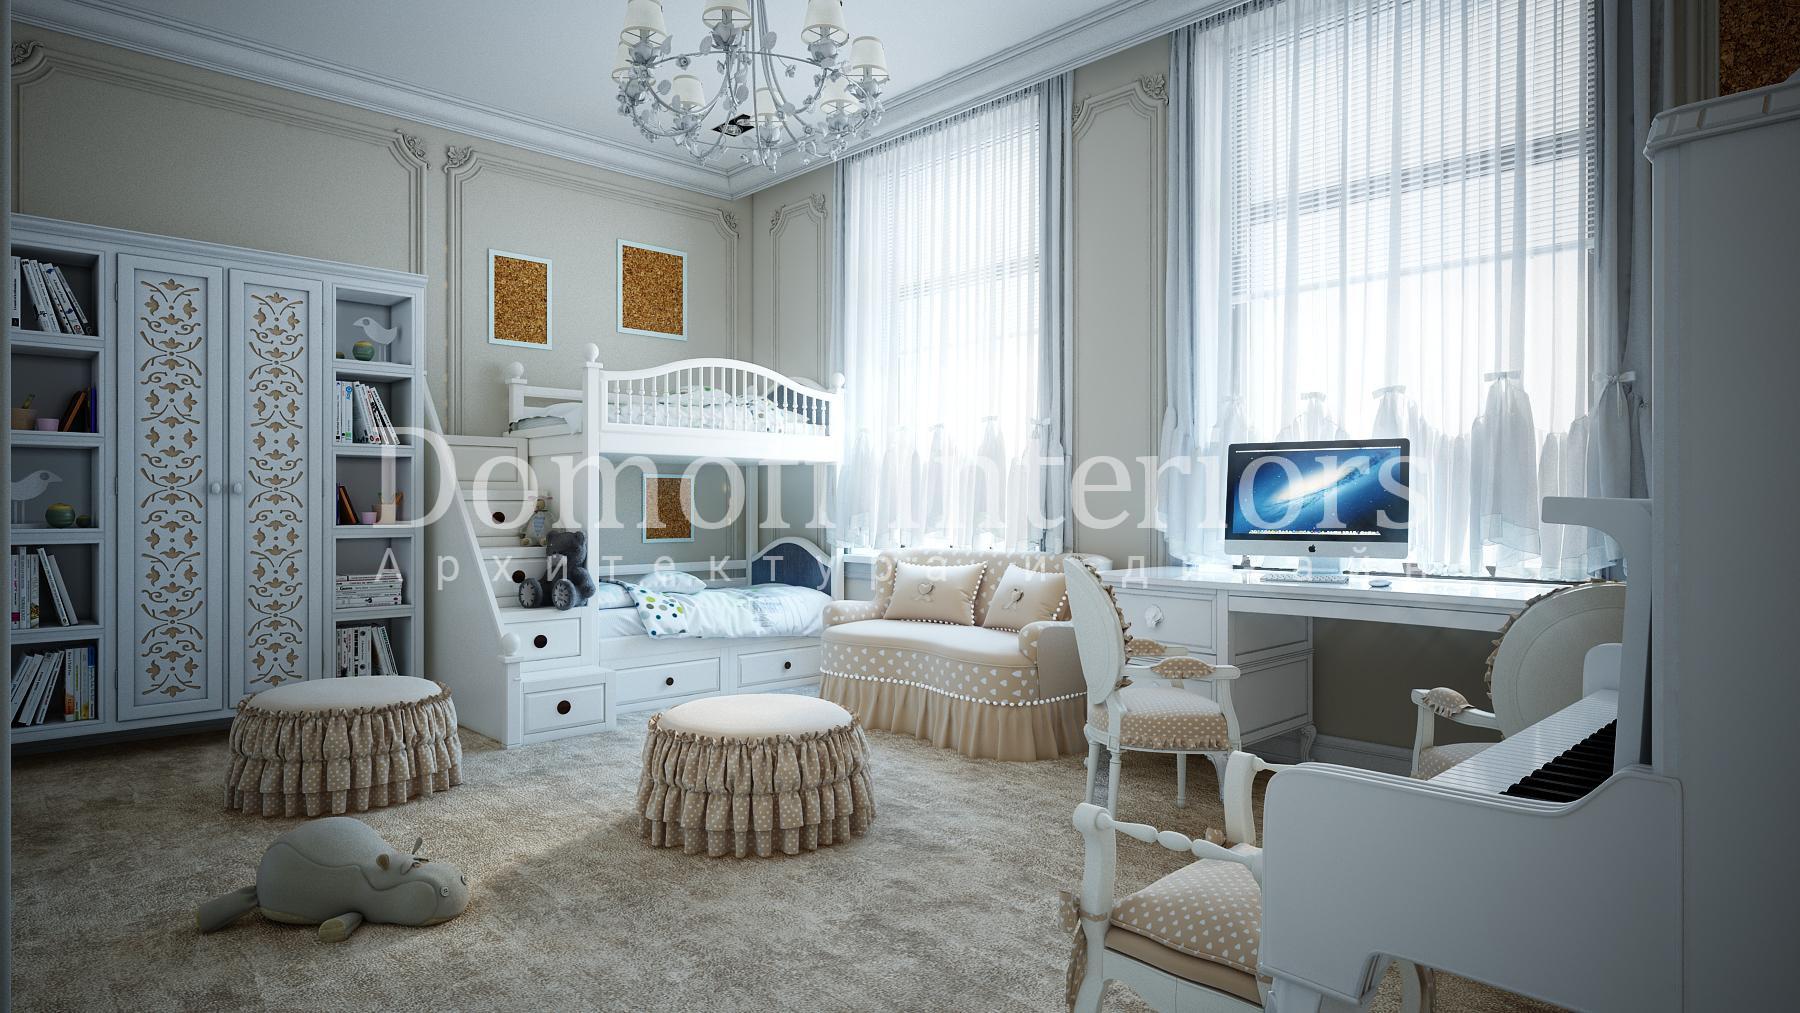 Girl's nursery made in the style of Eclecticism Neoclassicism